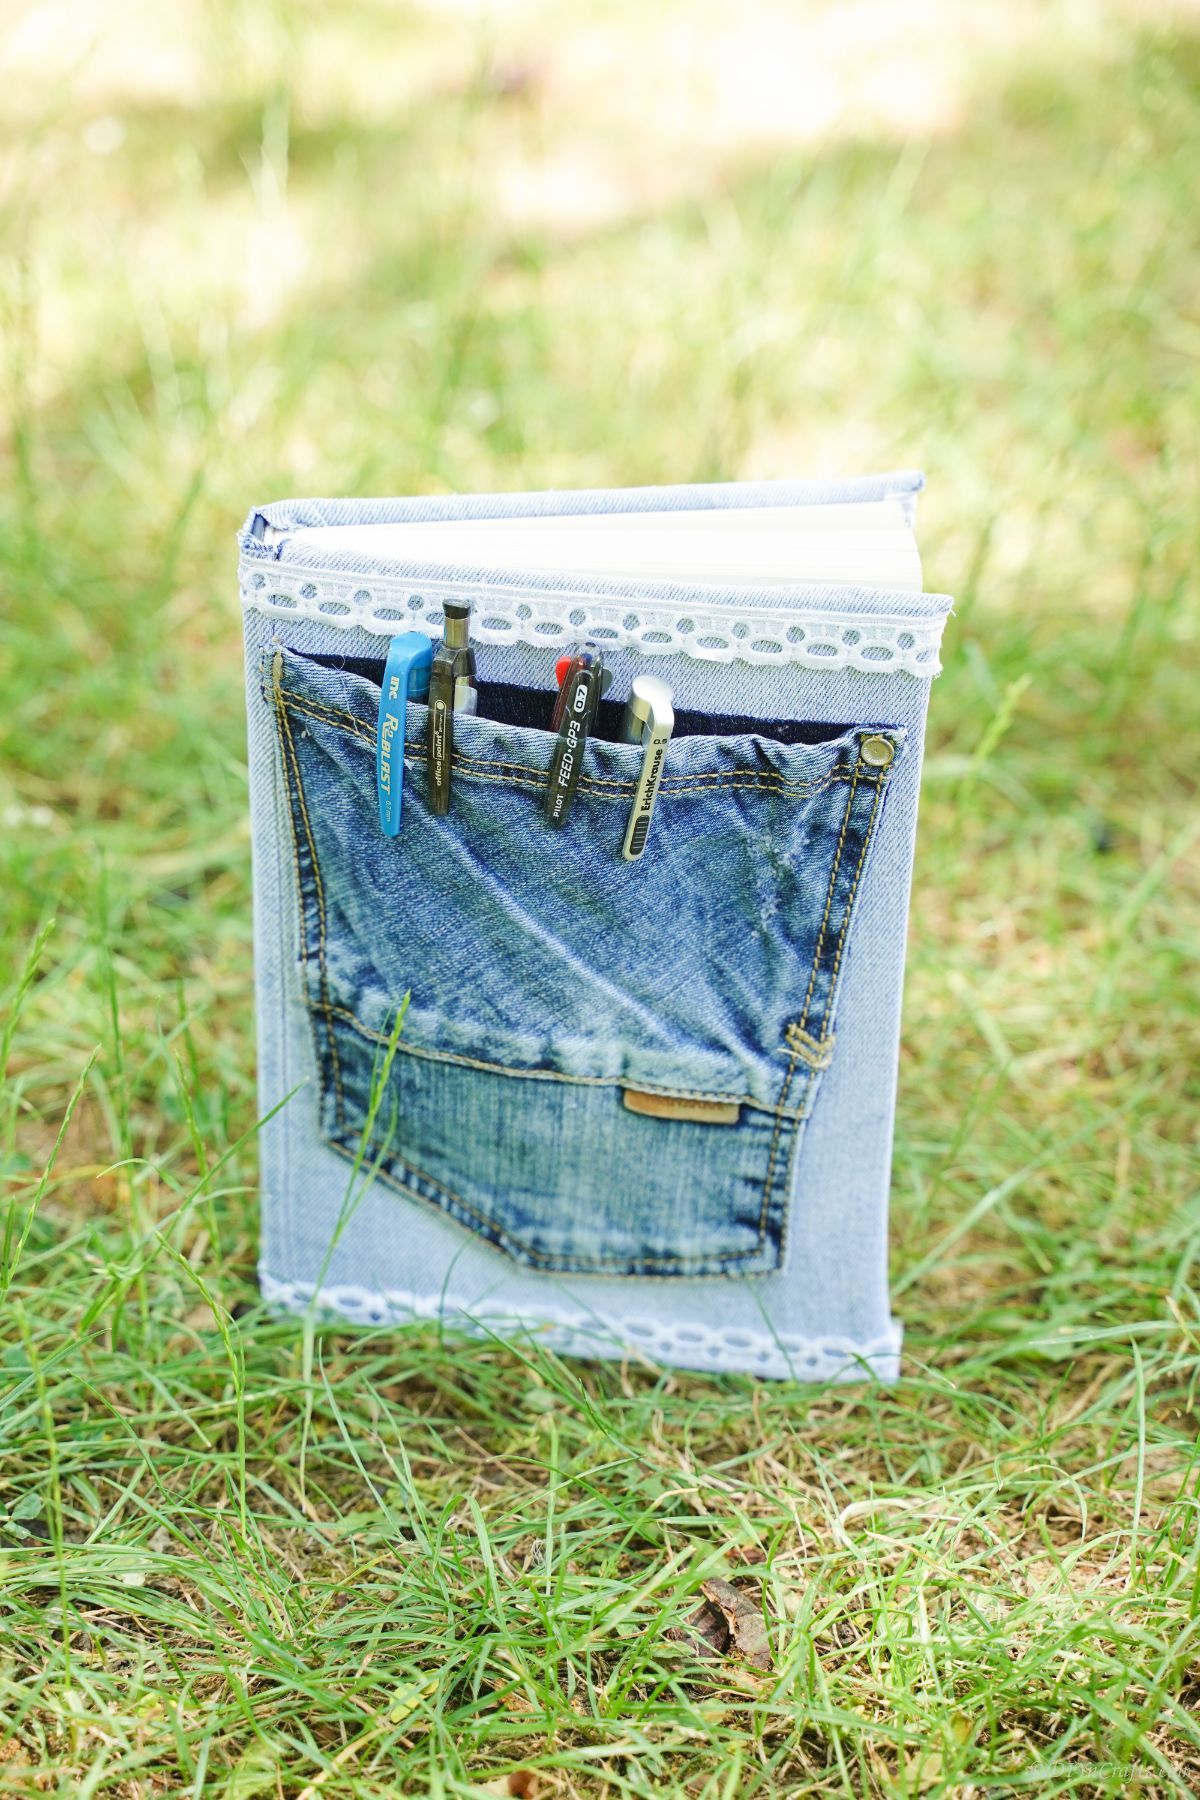 book with pocket on front sitting on grass